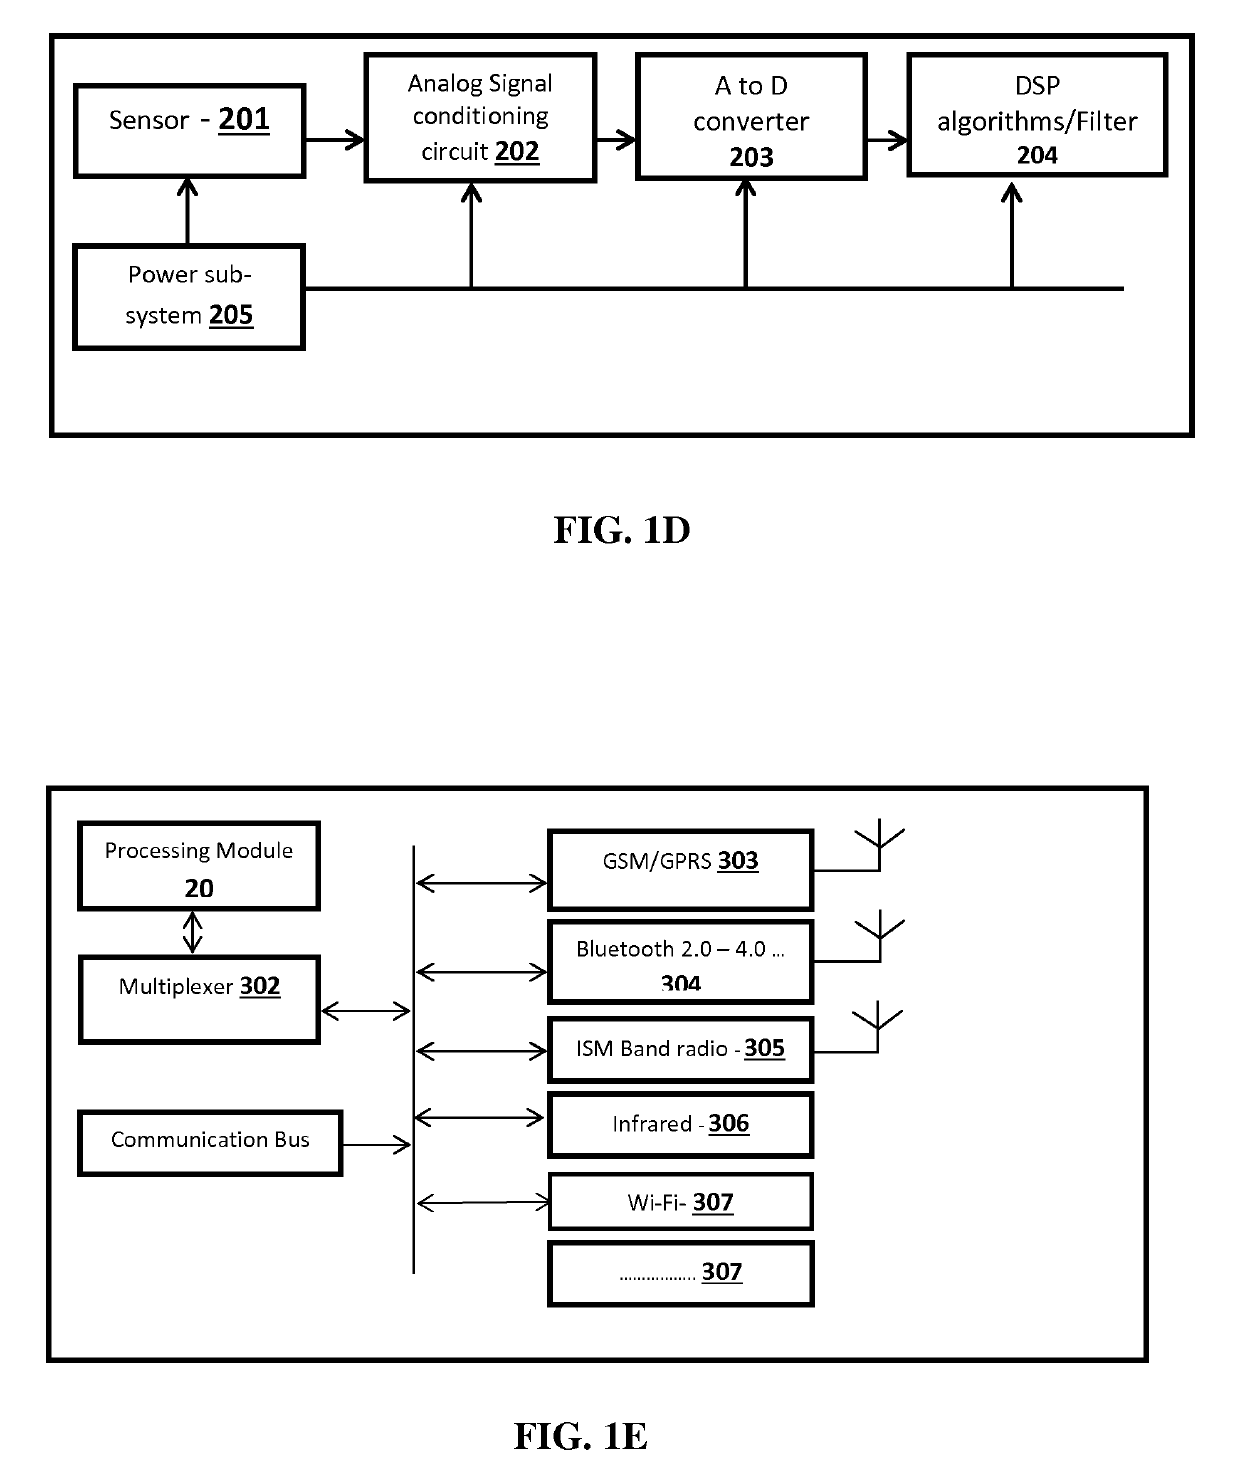 System, method and device to record personal environment, enable preferred personal indoor environment envelope and raise alerts for deviation thereof